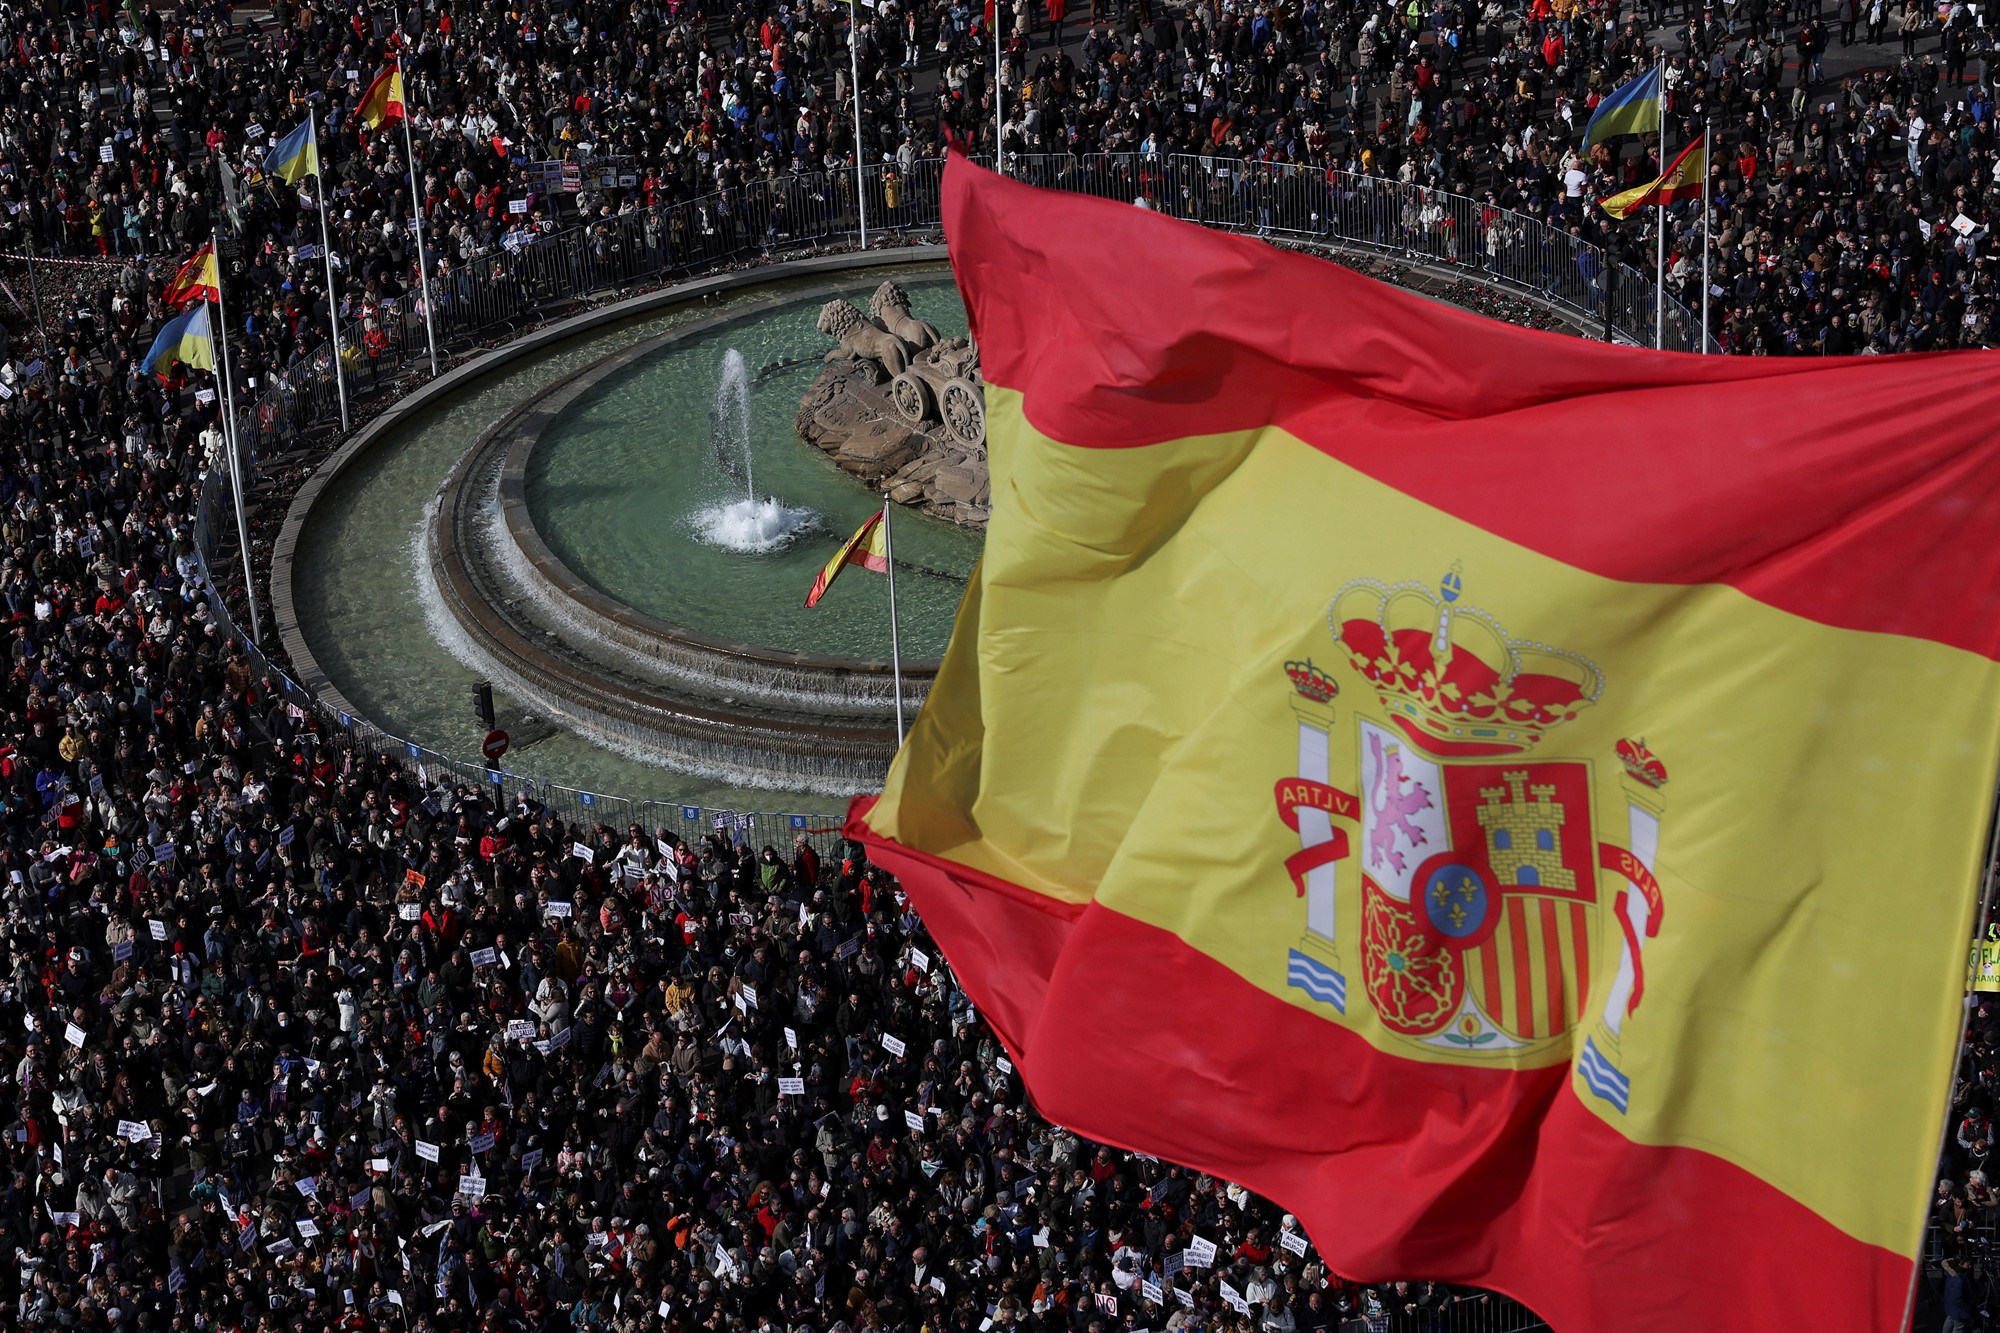 A crowd of people around a fountain beneath the flying Spanish flag